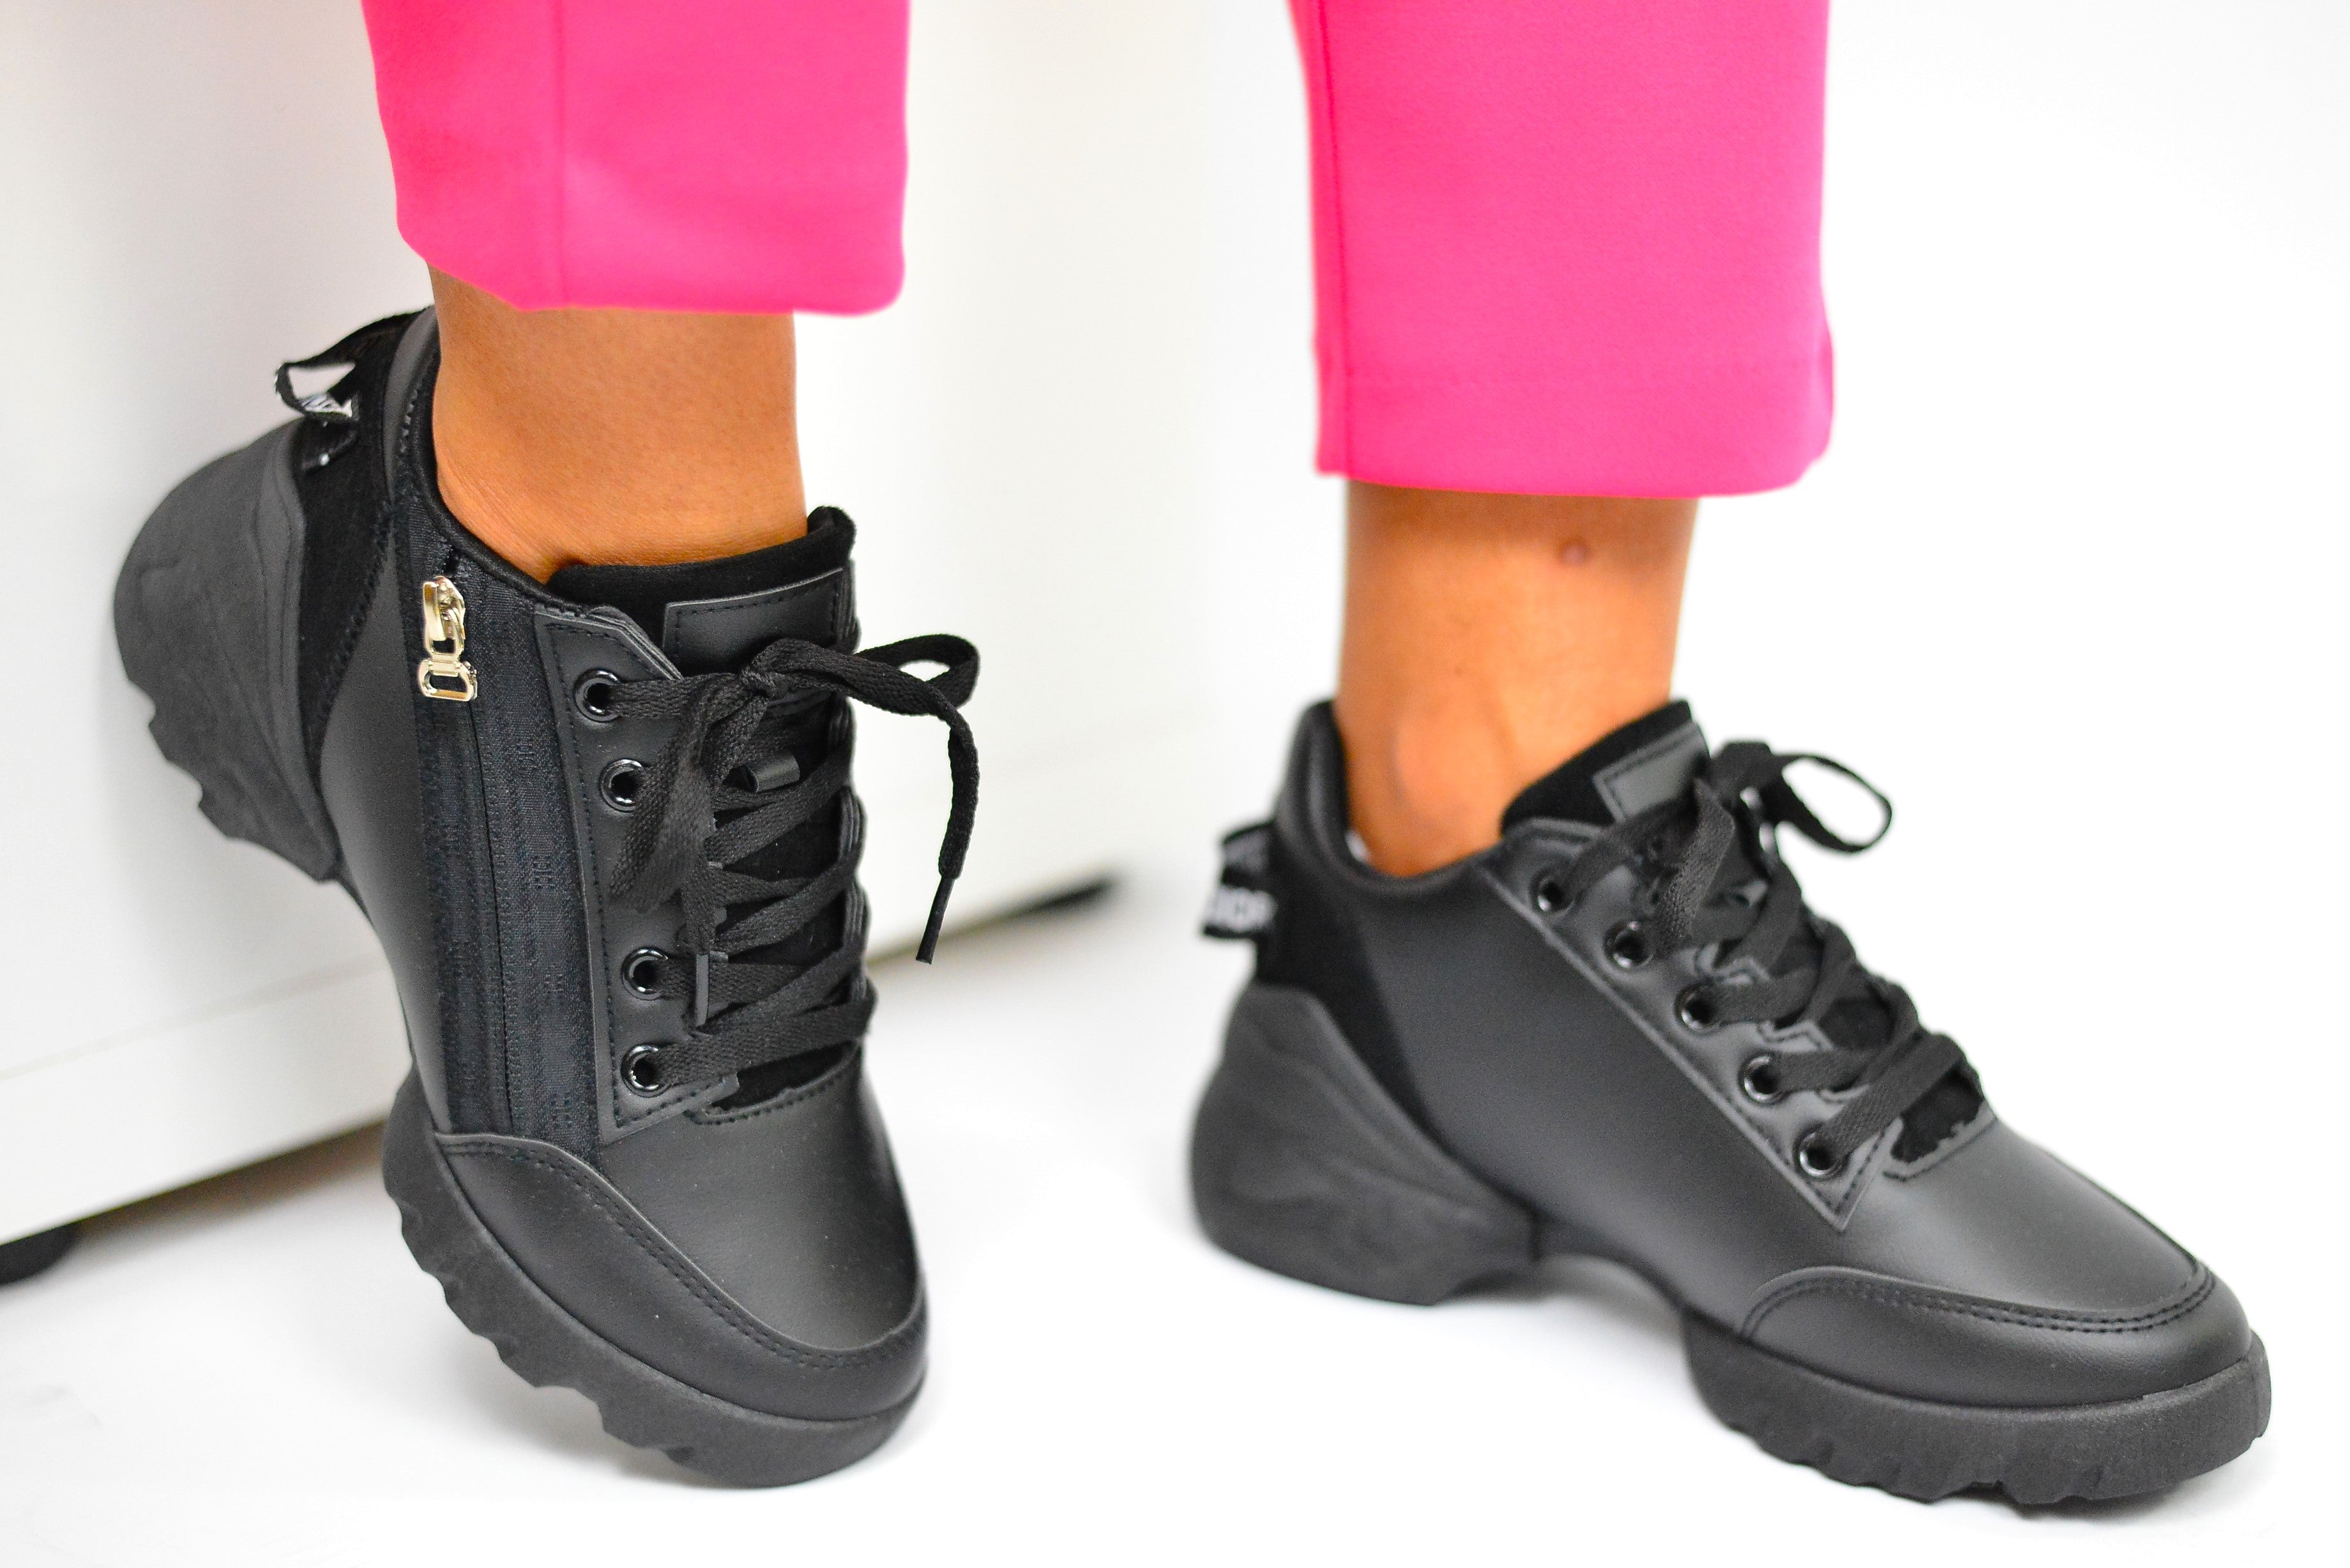 Women's Black Fergie Sneakers Made of Ecological Leather